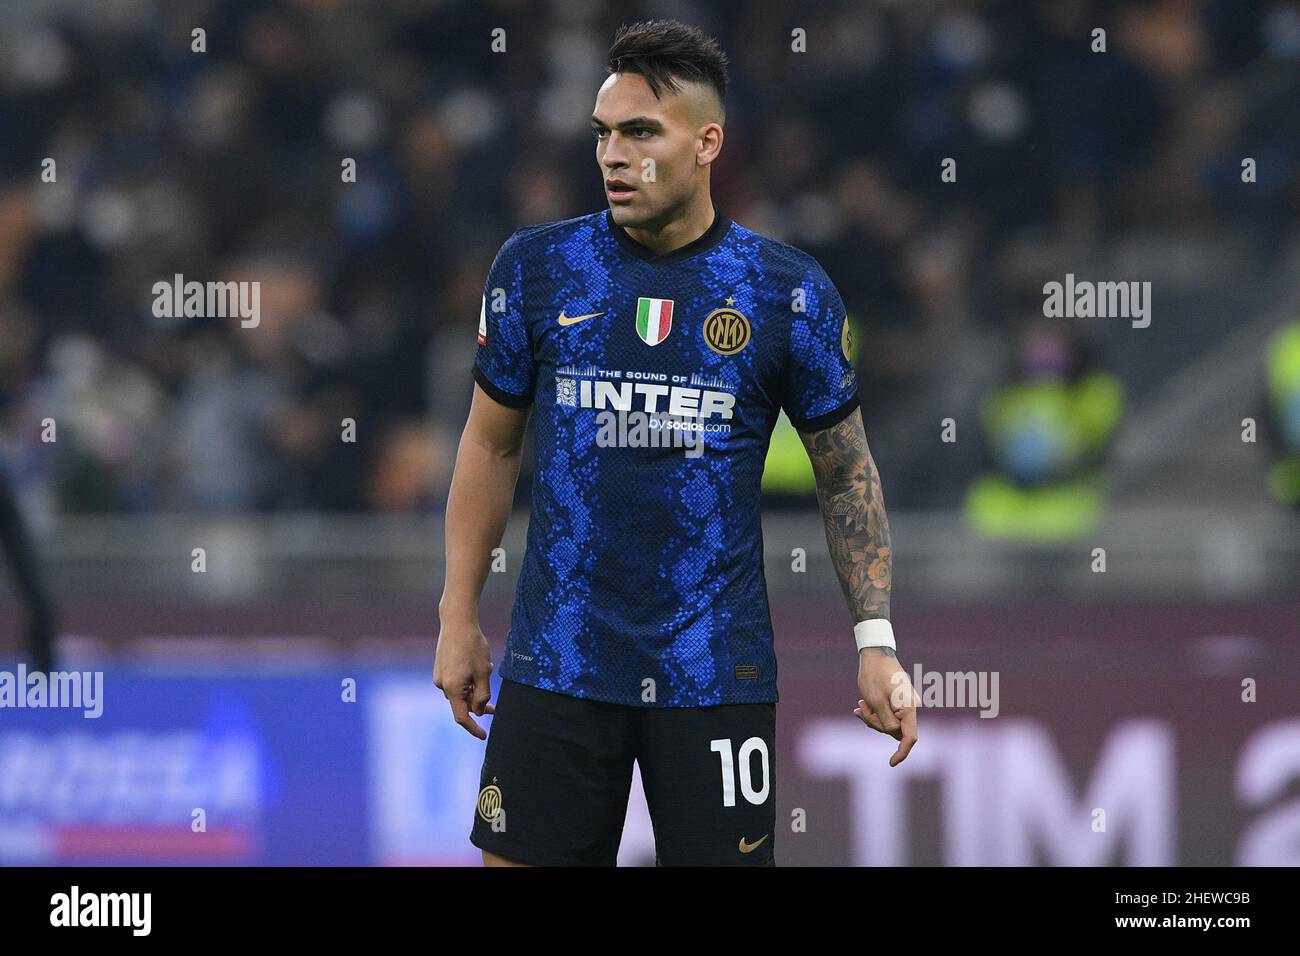 Milan, Italy. 12th Jan, 2022. Lautaro Martinez of FC Internazionale during the Italian SuperCup Final match between FC Internazionale and Juventus FC at Stadio Giuseppe Meazza, Milan, Italy on 12 January 2022. Credit: Giuseppe Maffia/Alamy Live News Stock Photo